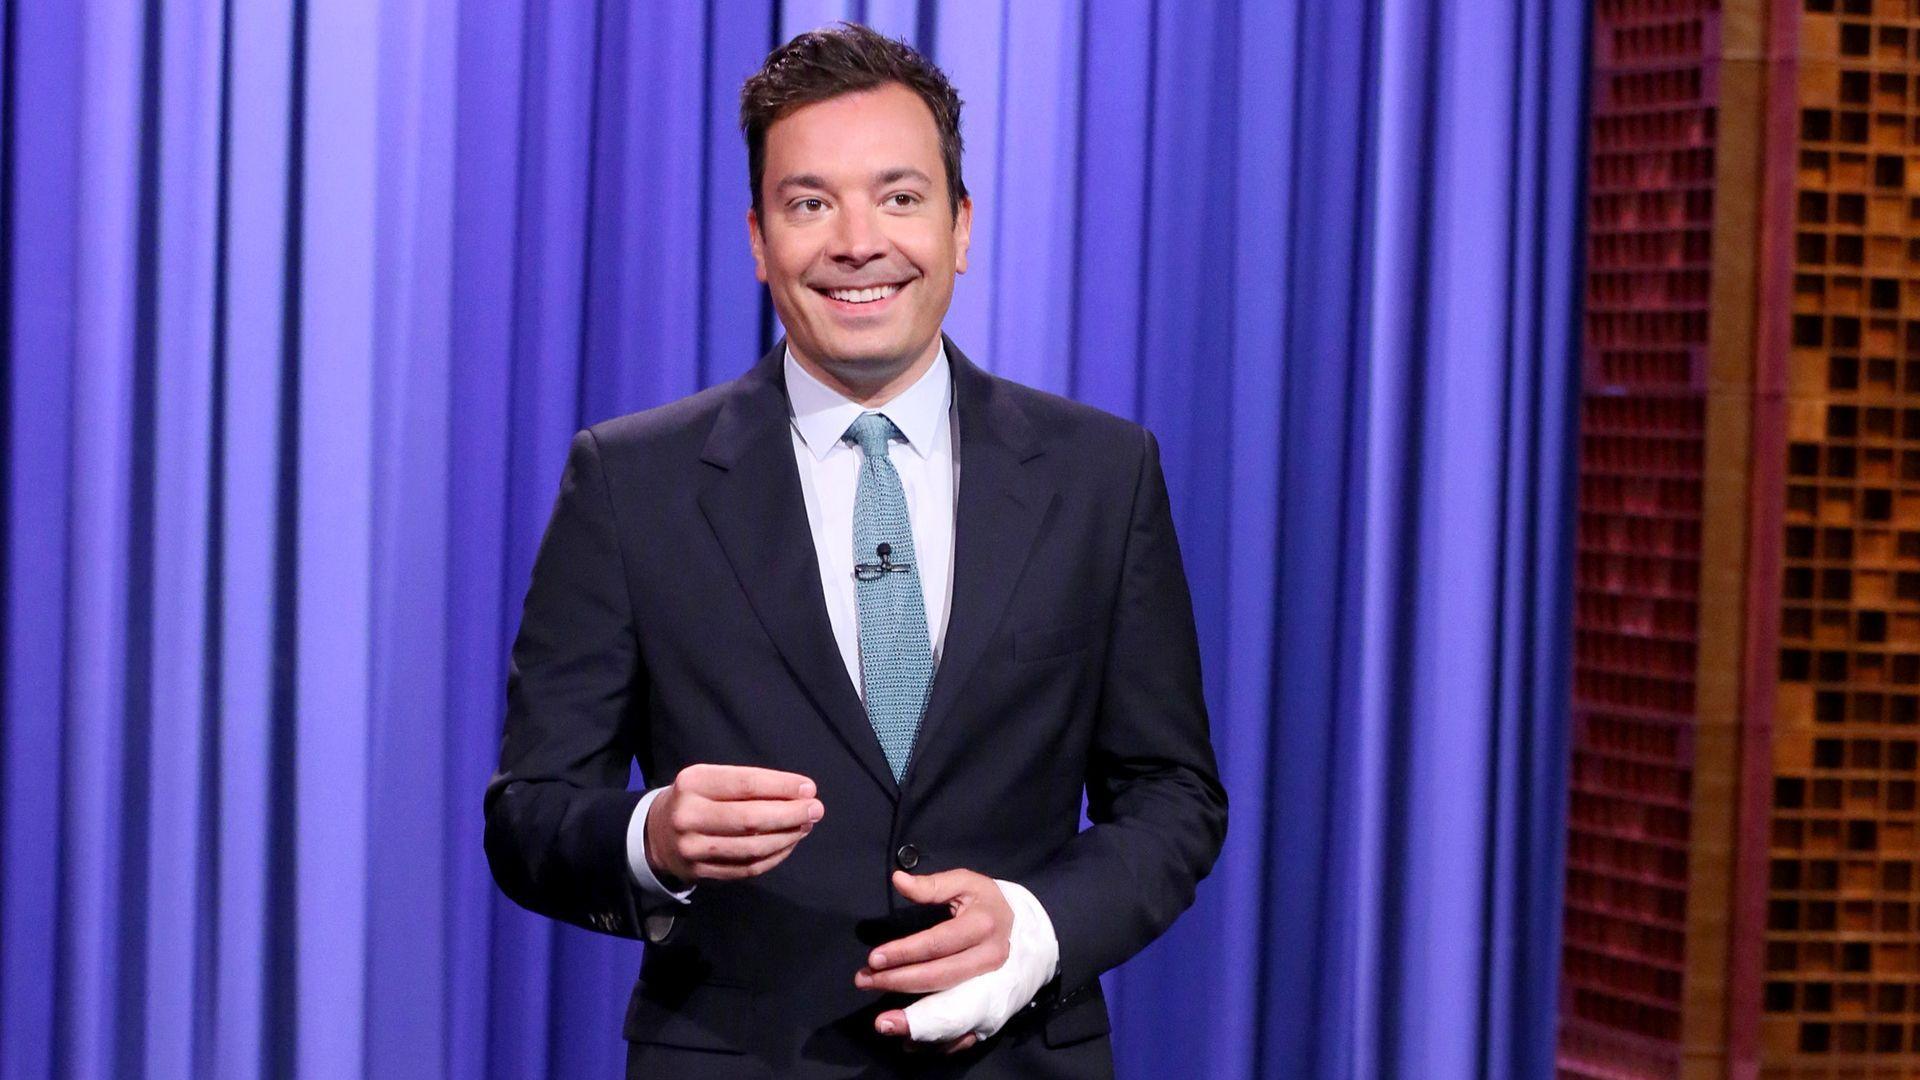 Jimmy Fallon Wallpaper Image Photo Picture Background